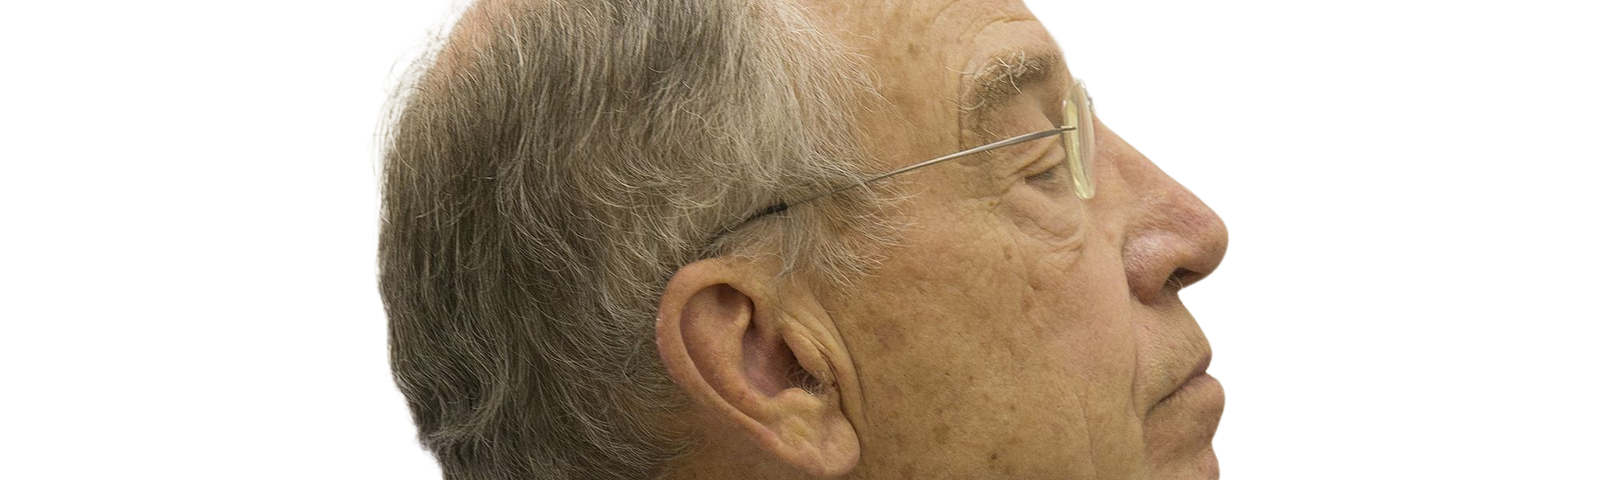 An arrogant profile view of 88-year-old US Senator from the State of Iowa, Chuck Grassley